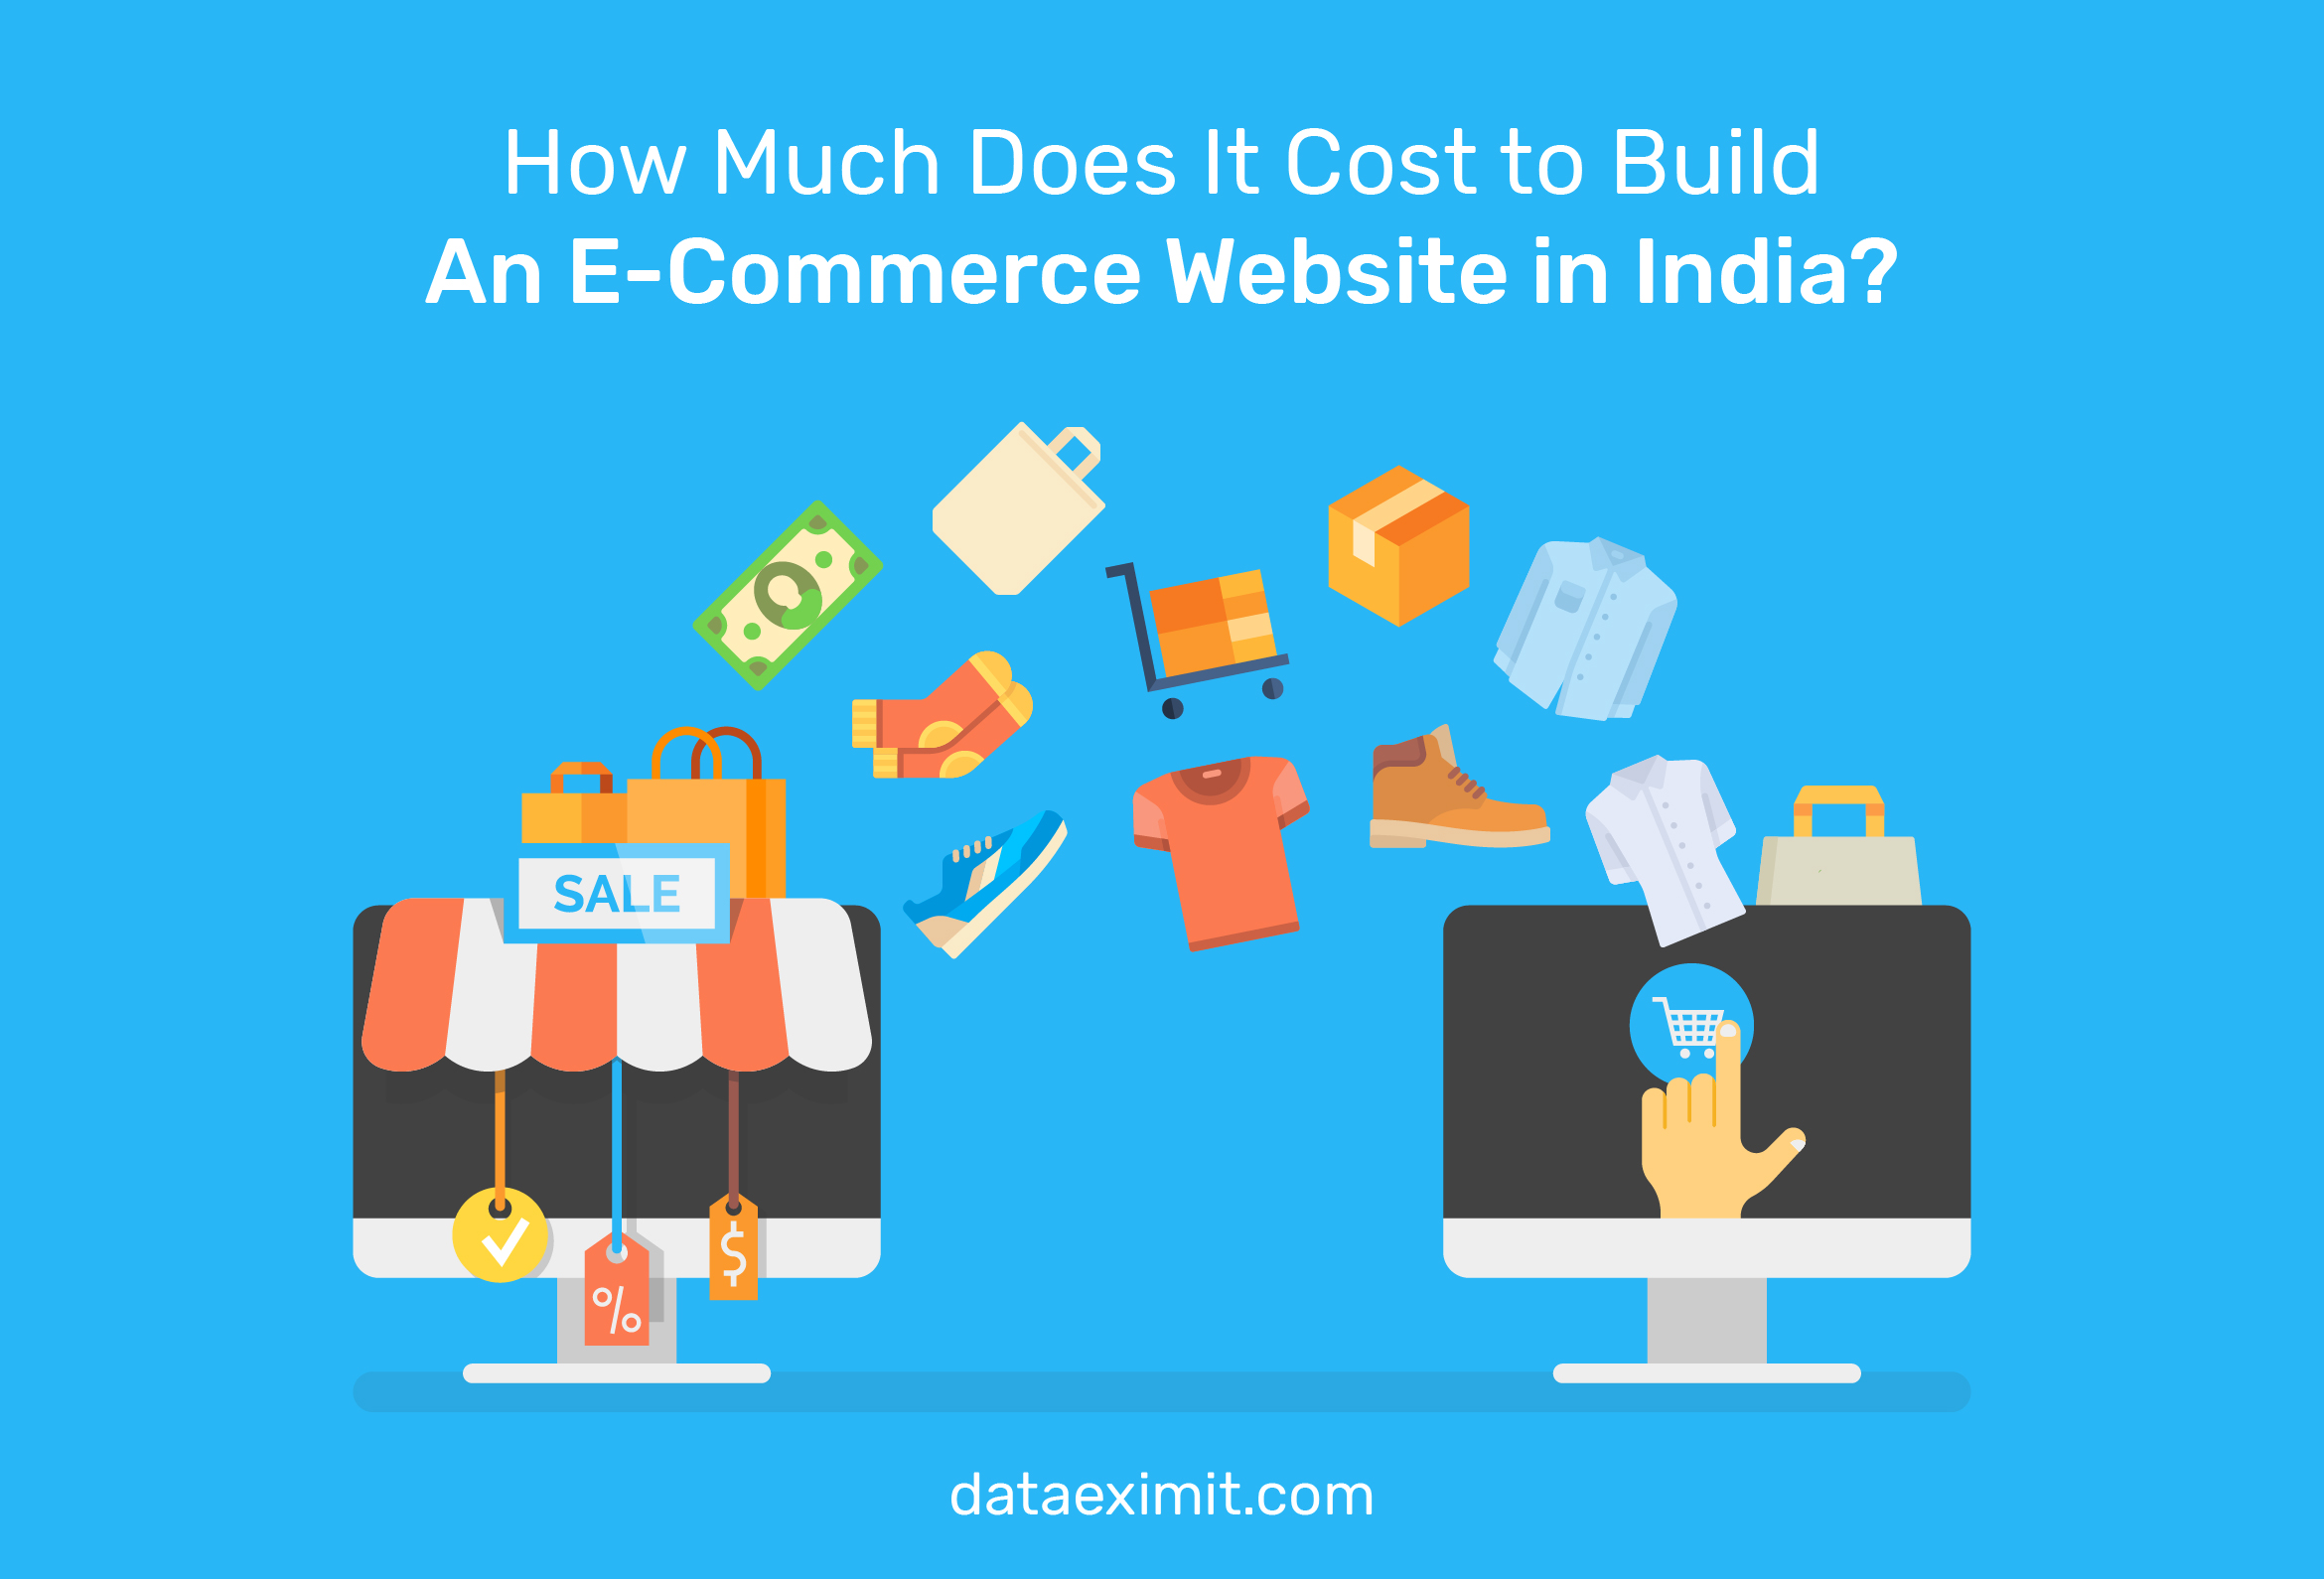 How Much Does It Cost to Build An E-Commerce Website in India